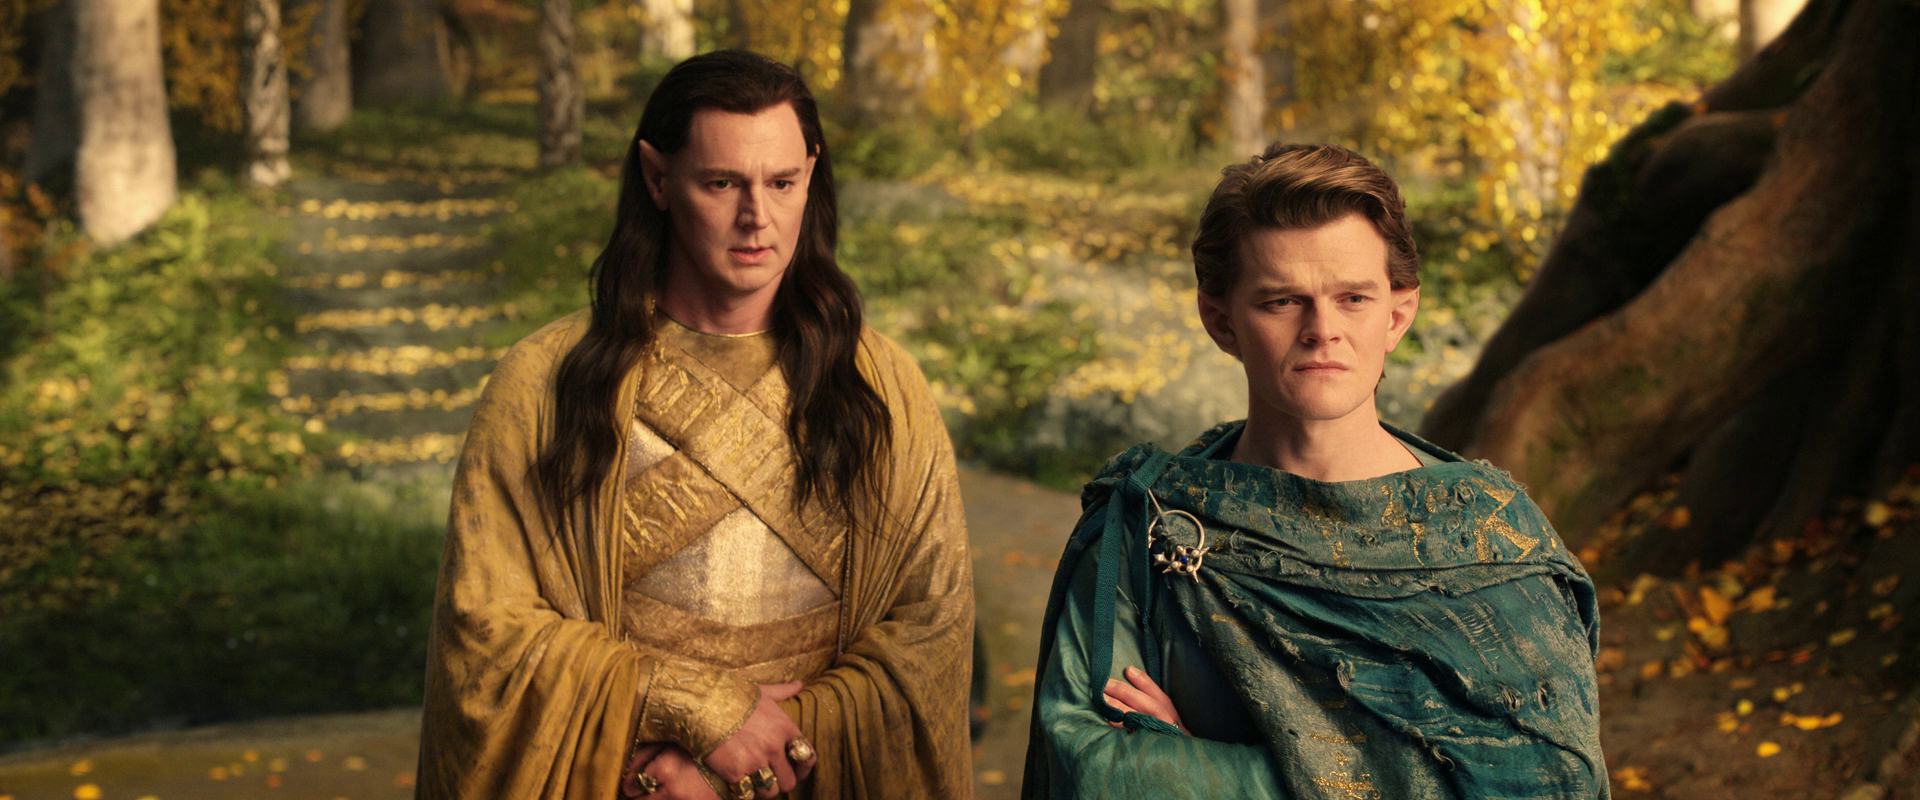 High King Gil-galad (Benjamin Walker) shares his worries with Elrond (Robert Aramayo) in The Lord of the Rings: The Rings of Power Season 1 Episode 1 "A Shadow of the Past" (2022), Amazon Studios.